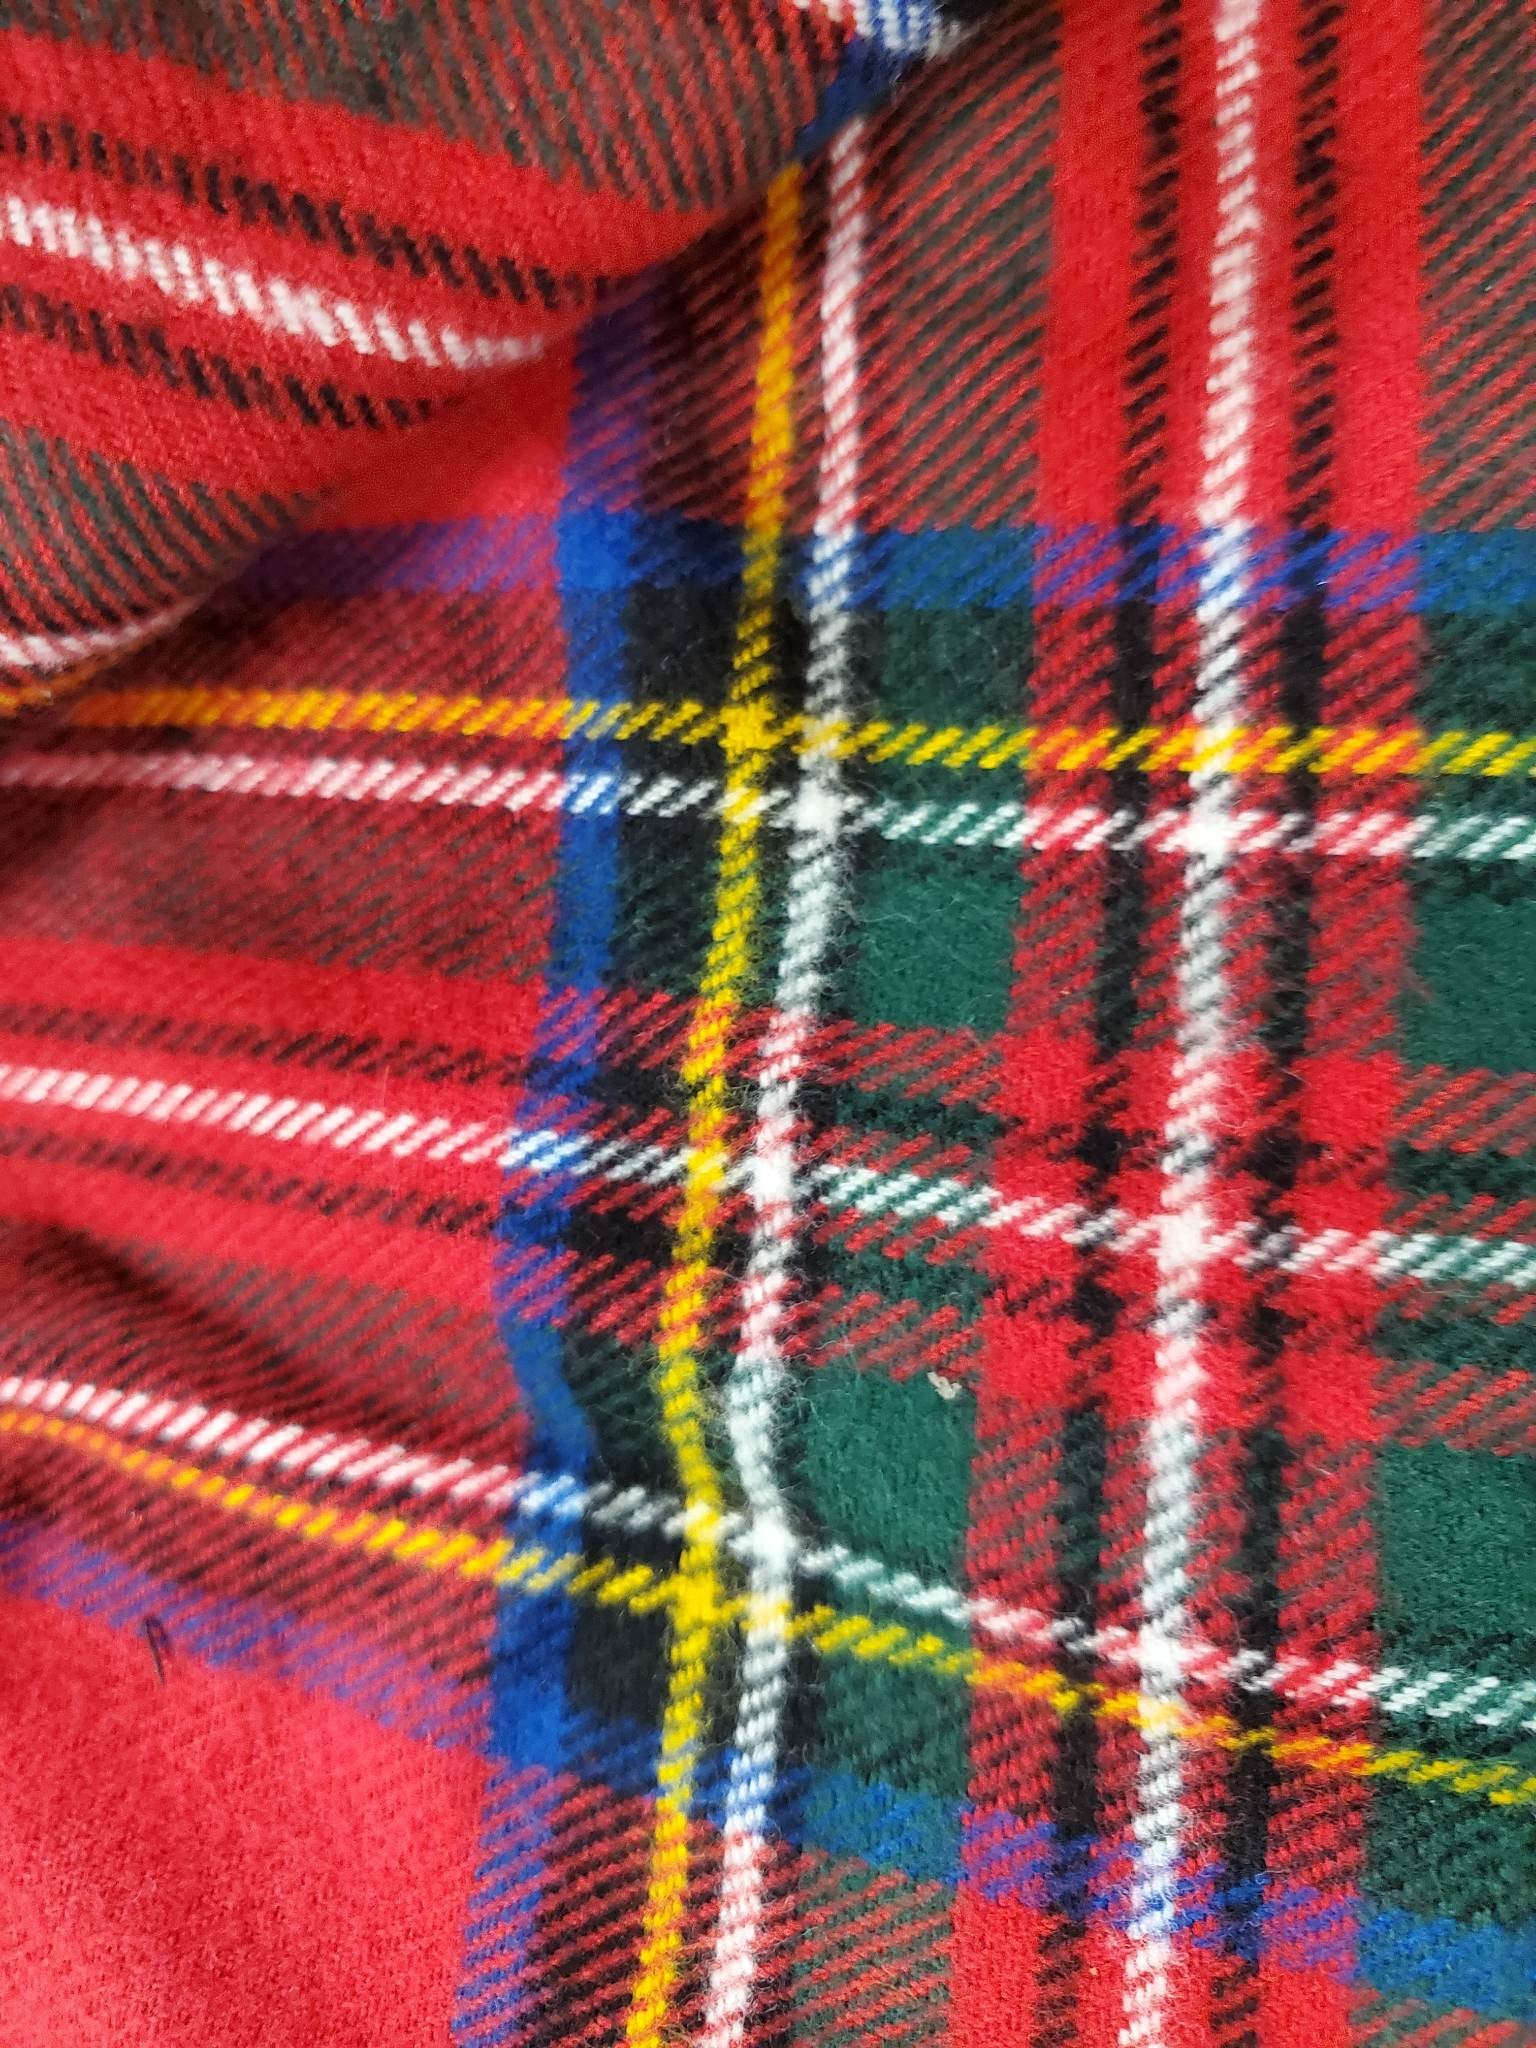 Plaid in Red / Blue / Green / White, Flannel Fabric